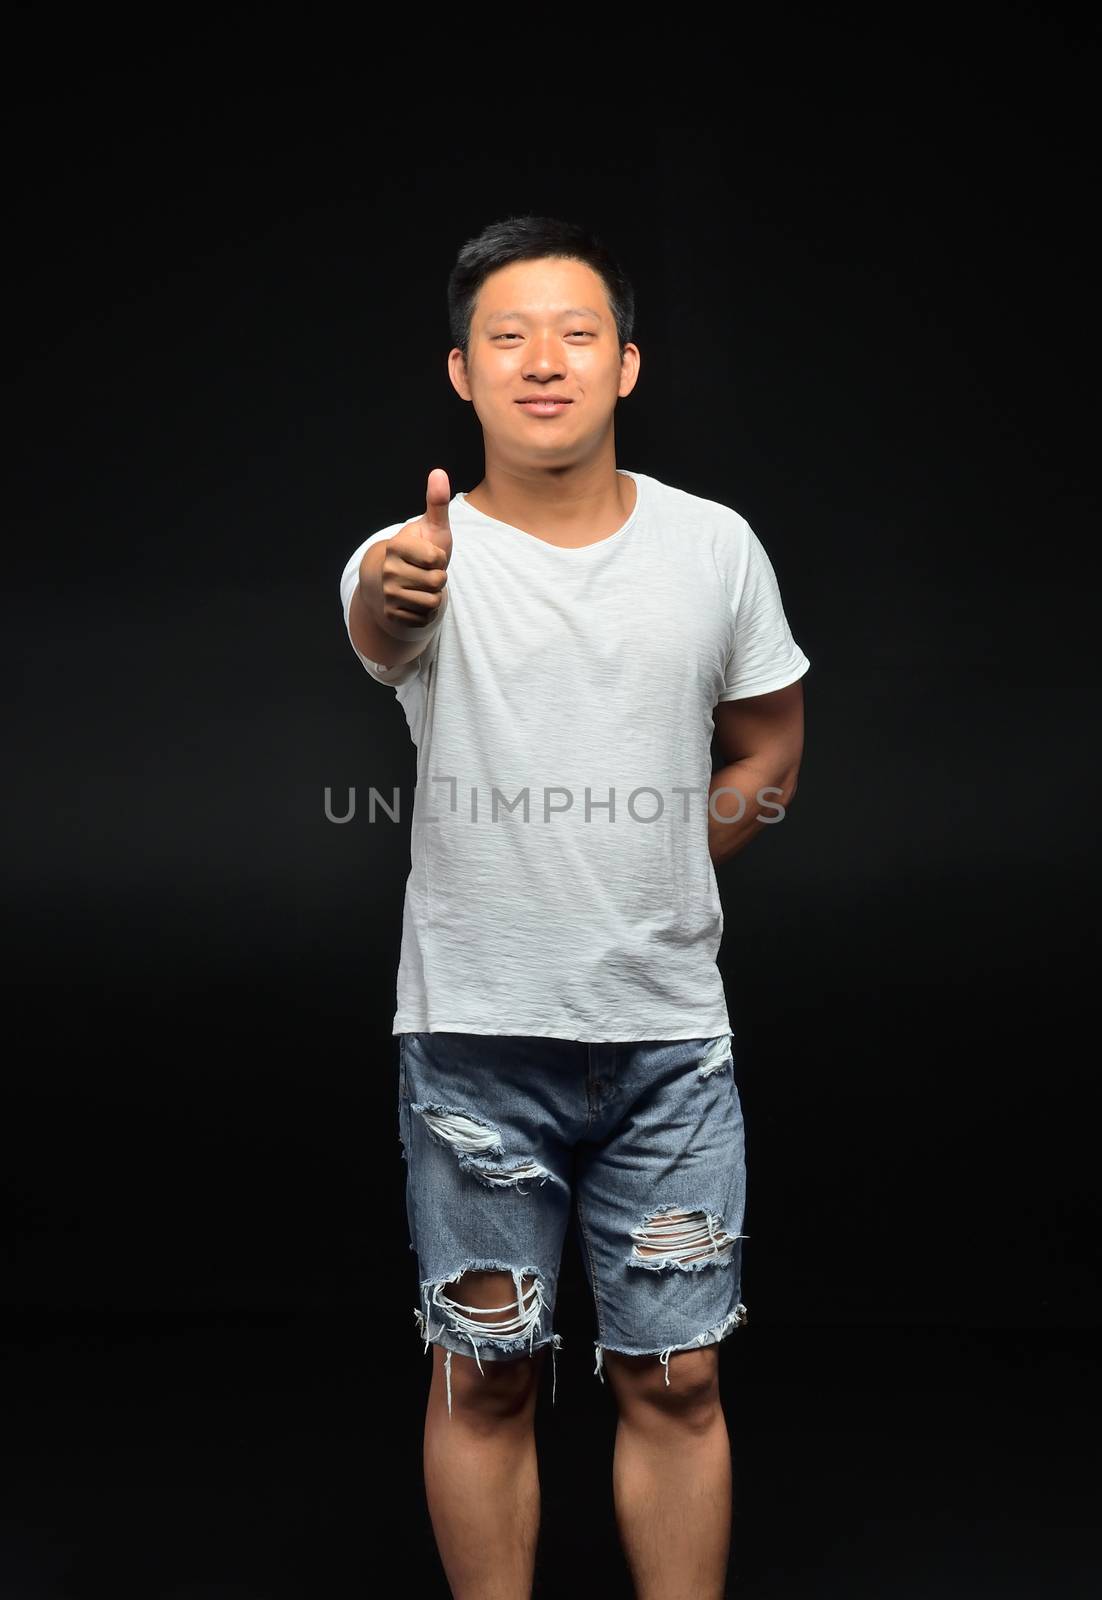 Portrait of a male Asian student of appearance on a black background that shows a thumbs up